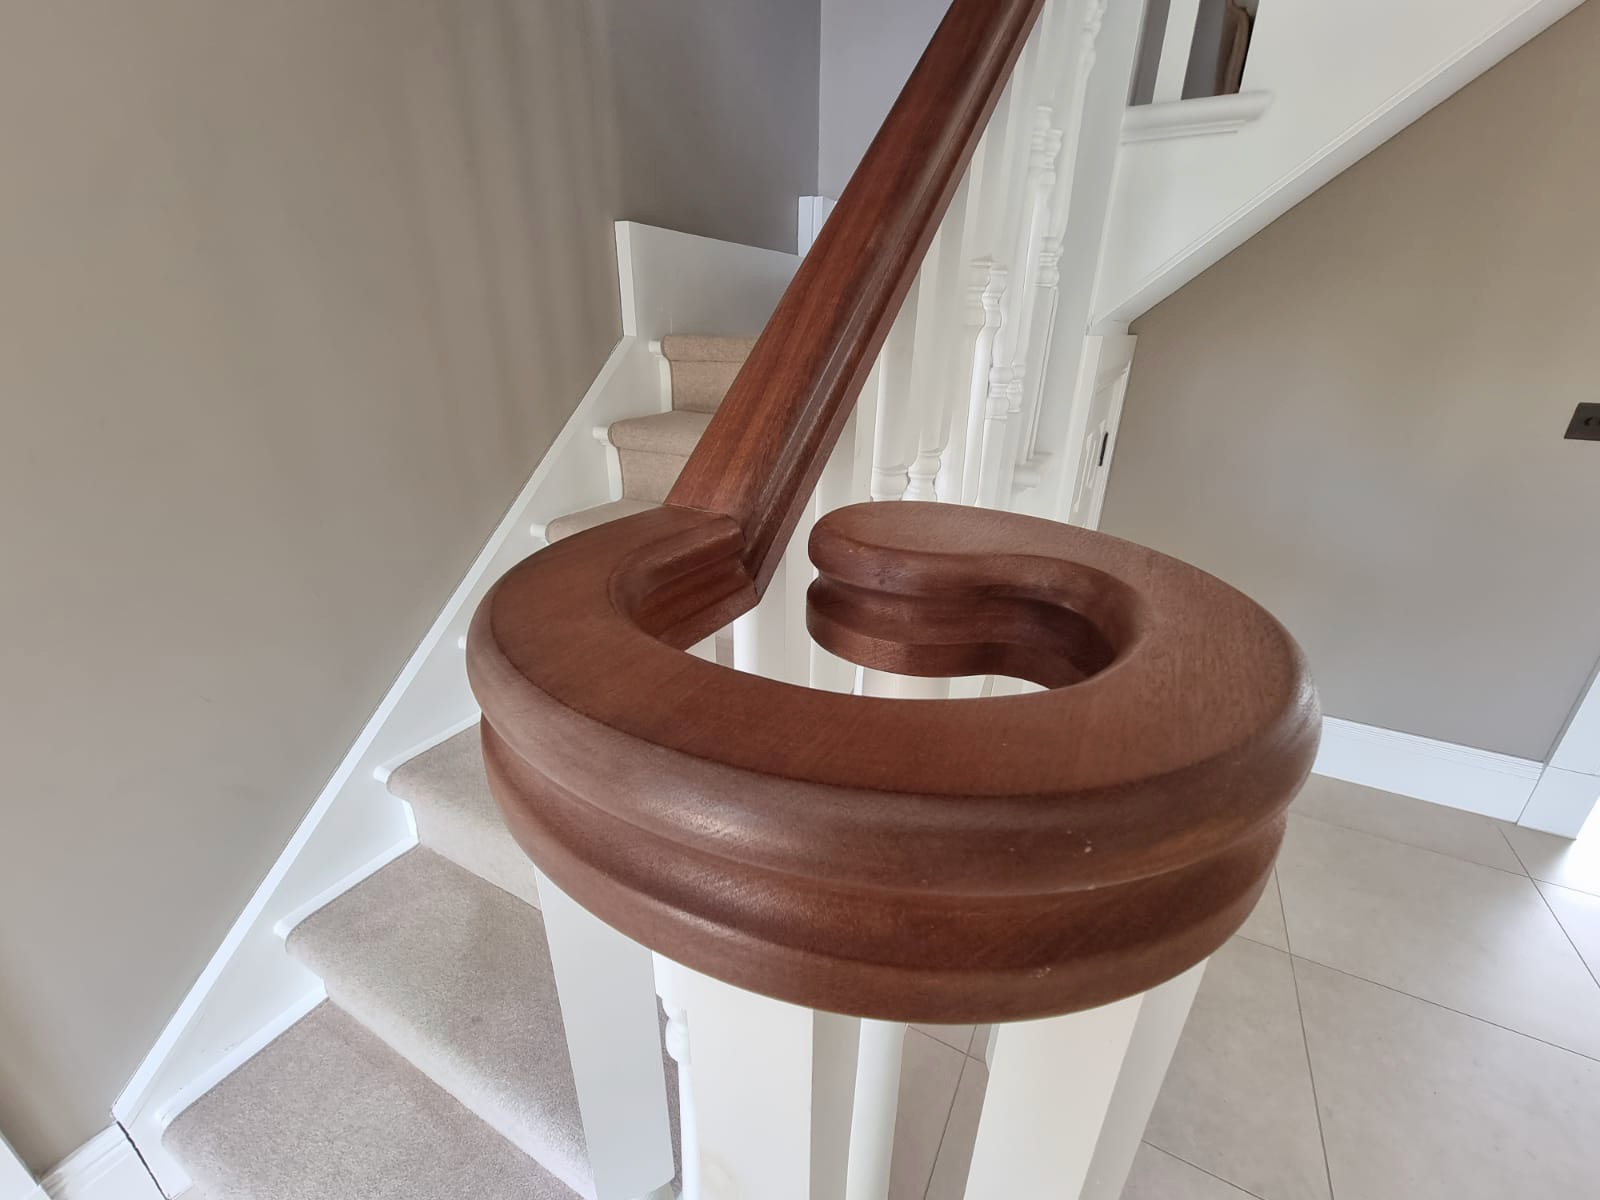 Traditional Arts and Crafts wooden handrail